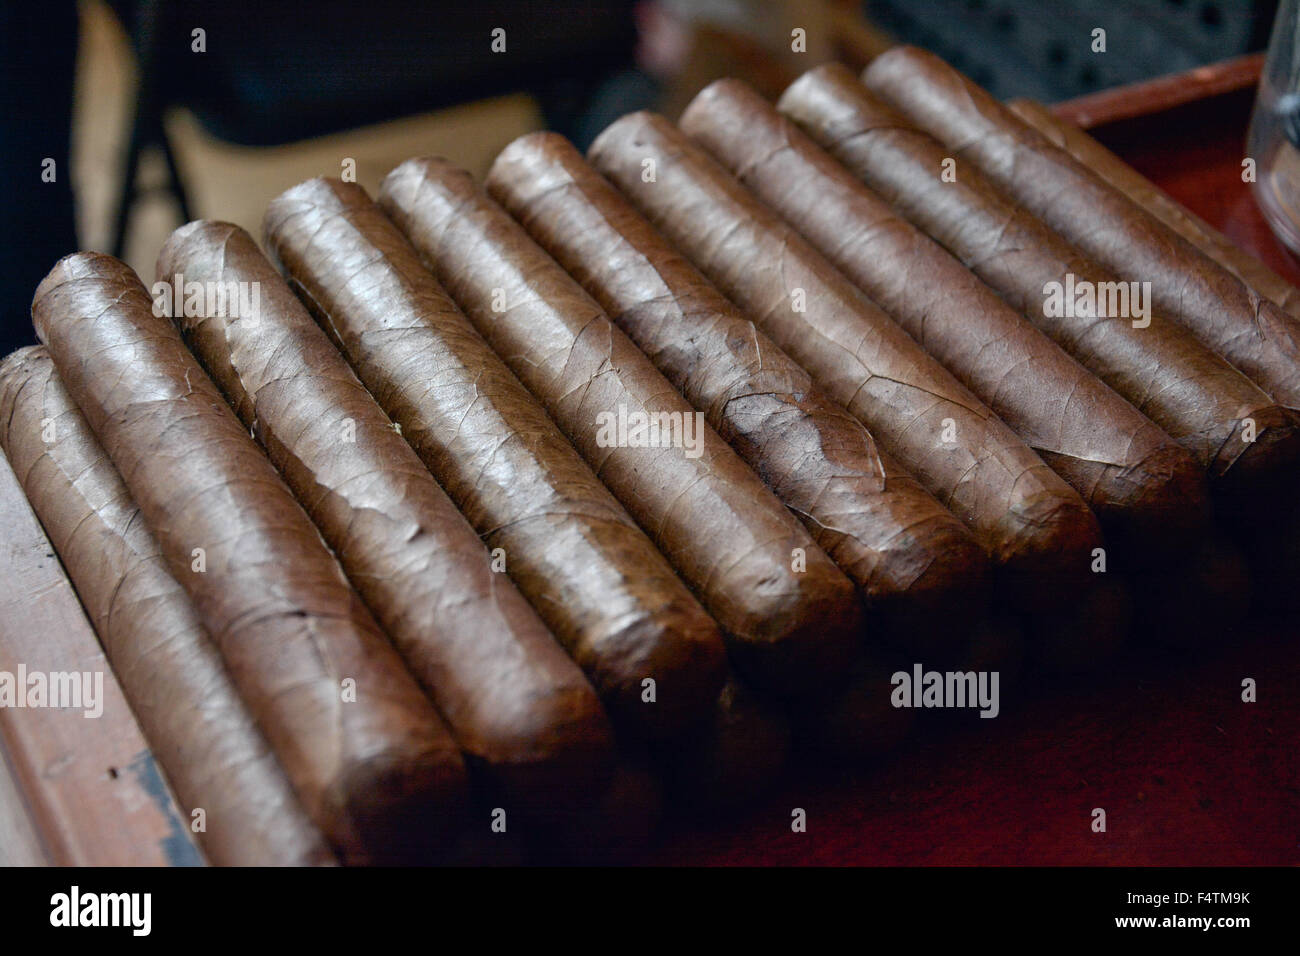 Moody, artistic and nostalgic view of Hand rolled Cuban cigars stacked in cigar factory work bench area Stock Photo